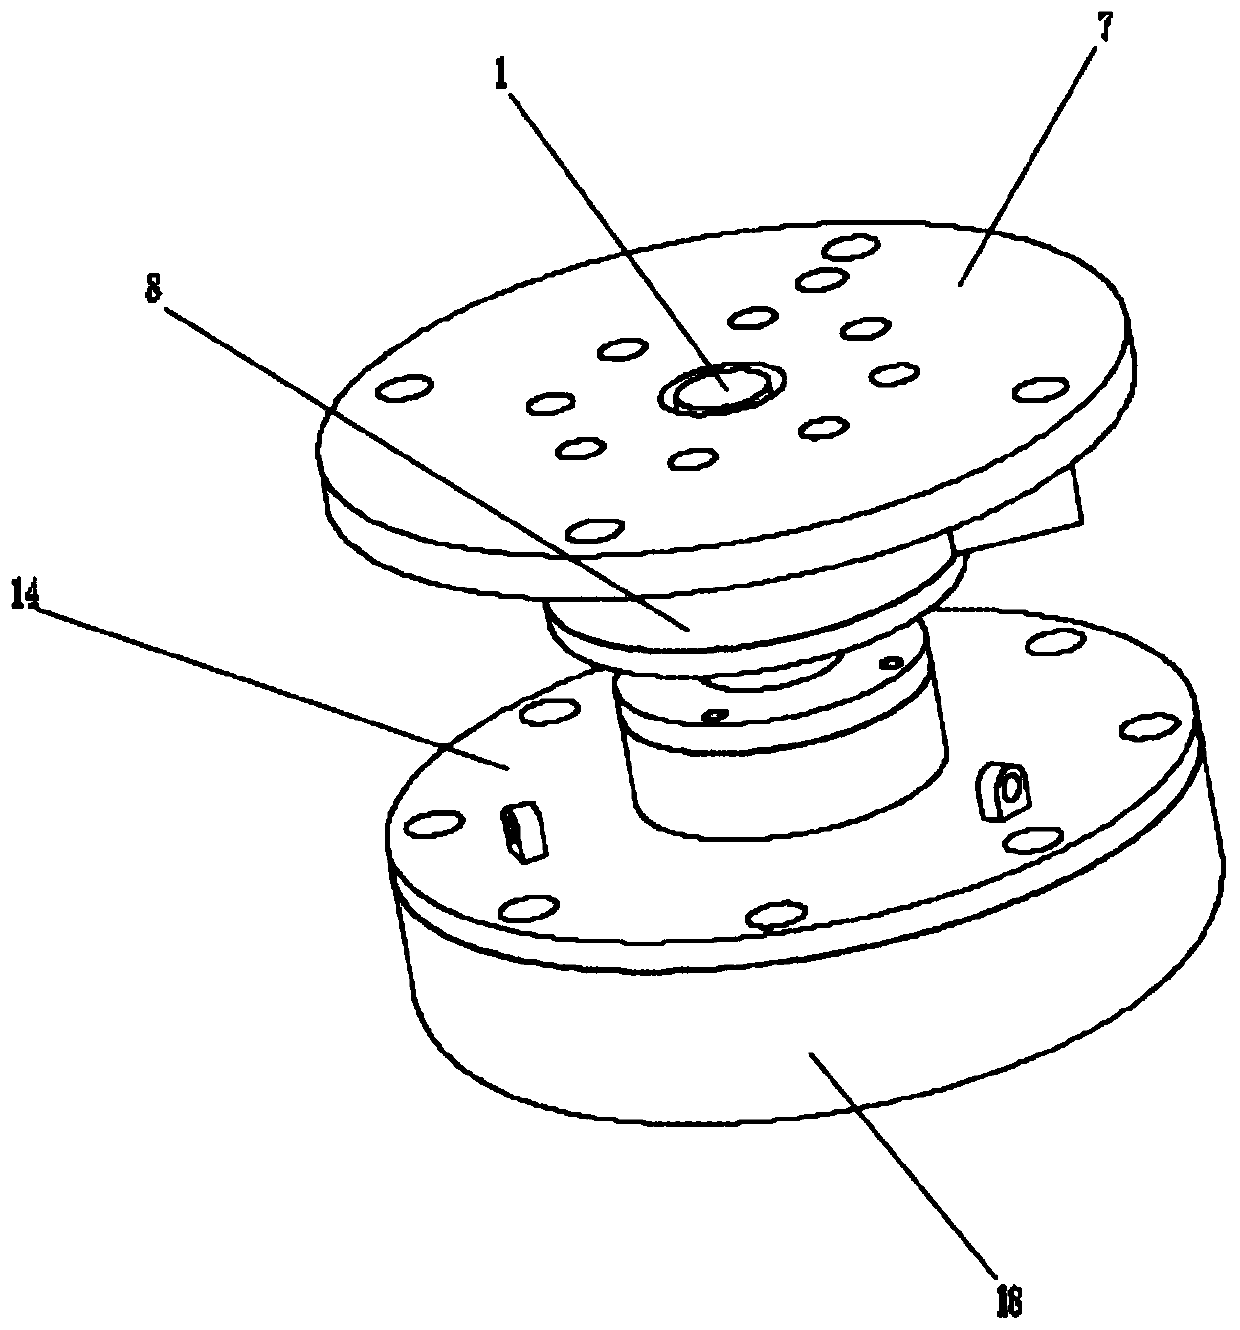 Self-limited foot end mechanism for waling robot